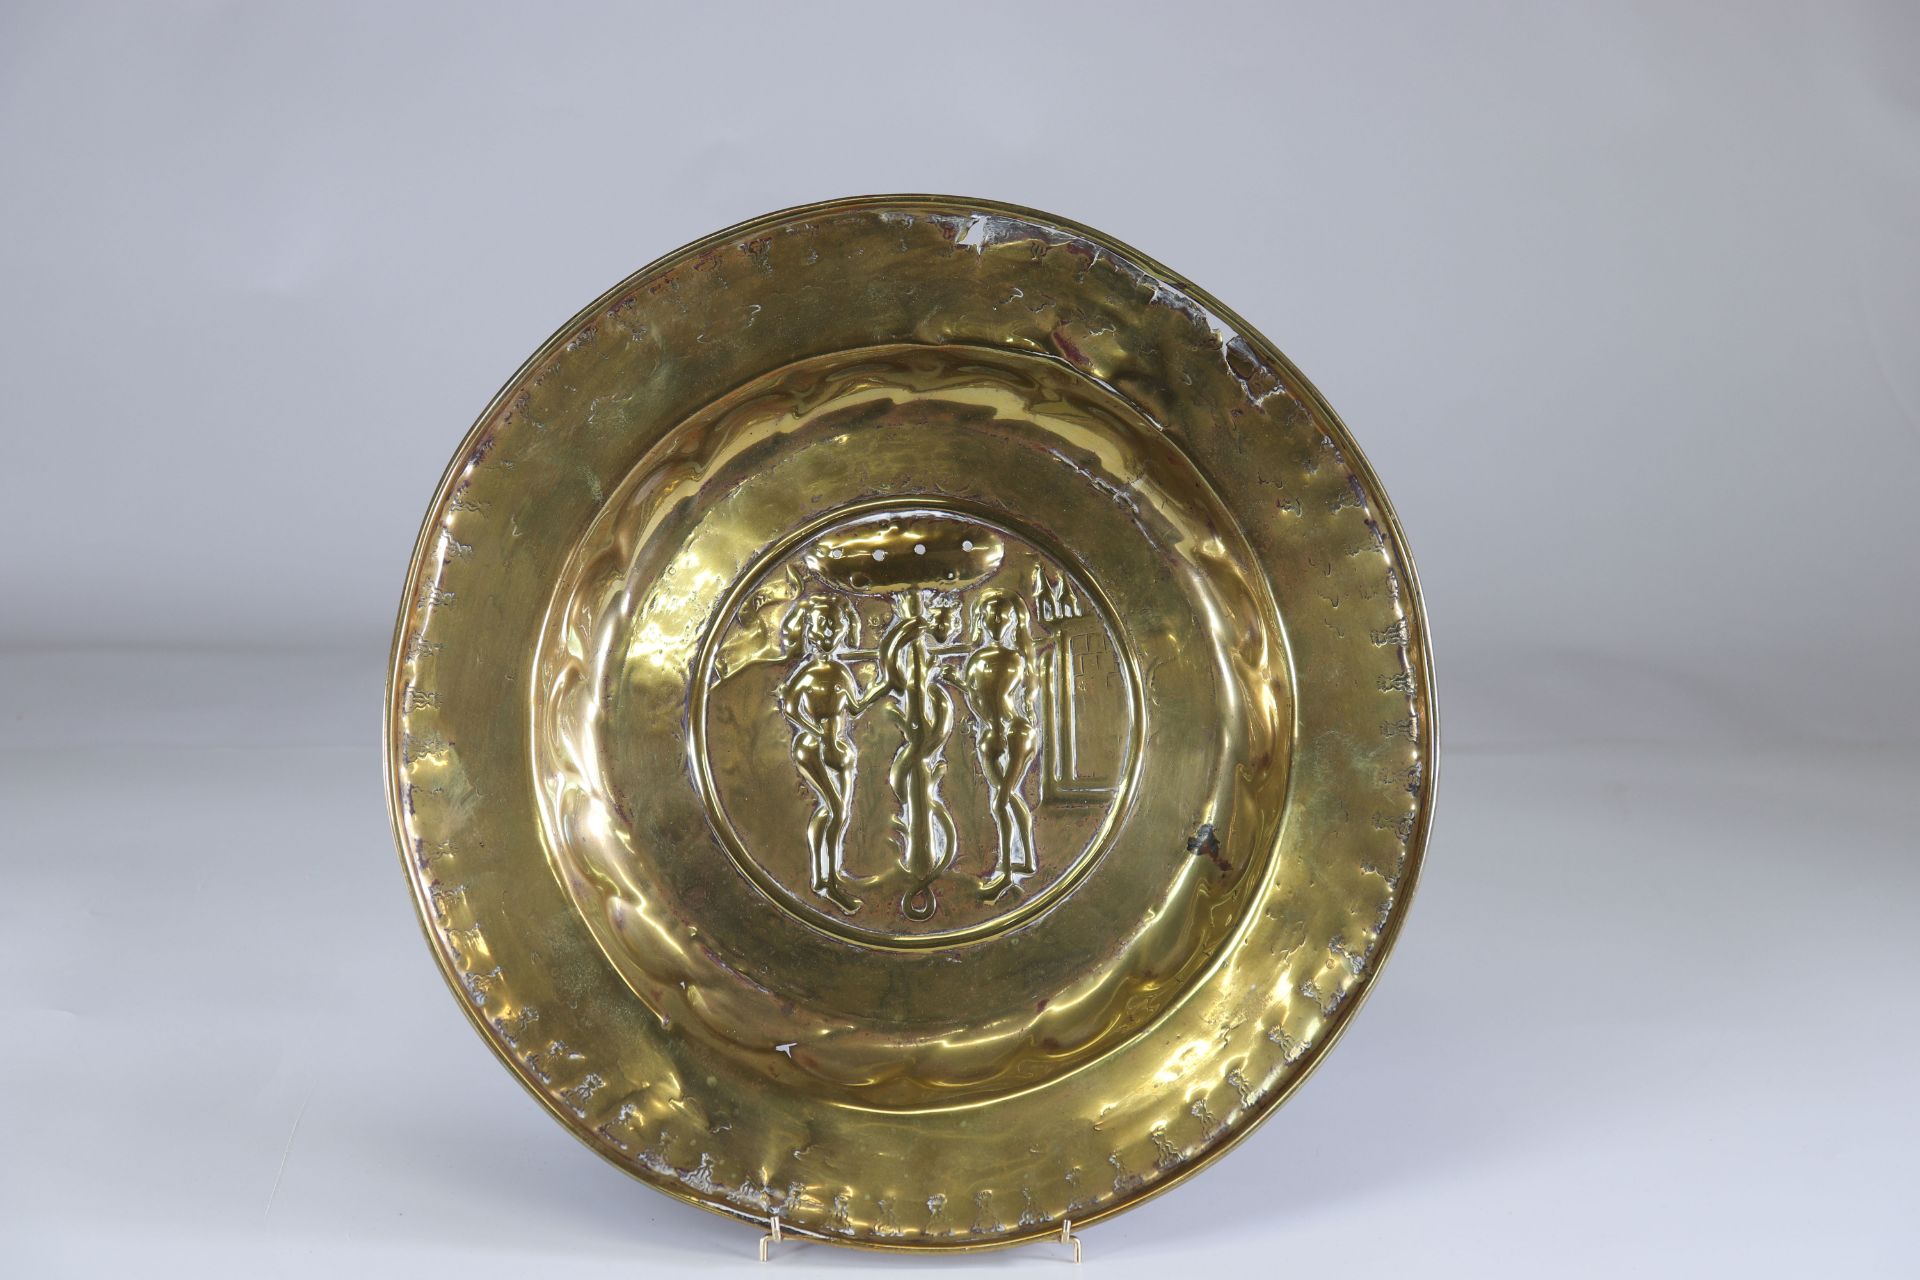 Offering dish decorated with Adam and Eve 17th Region: Germany Period: 17th